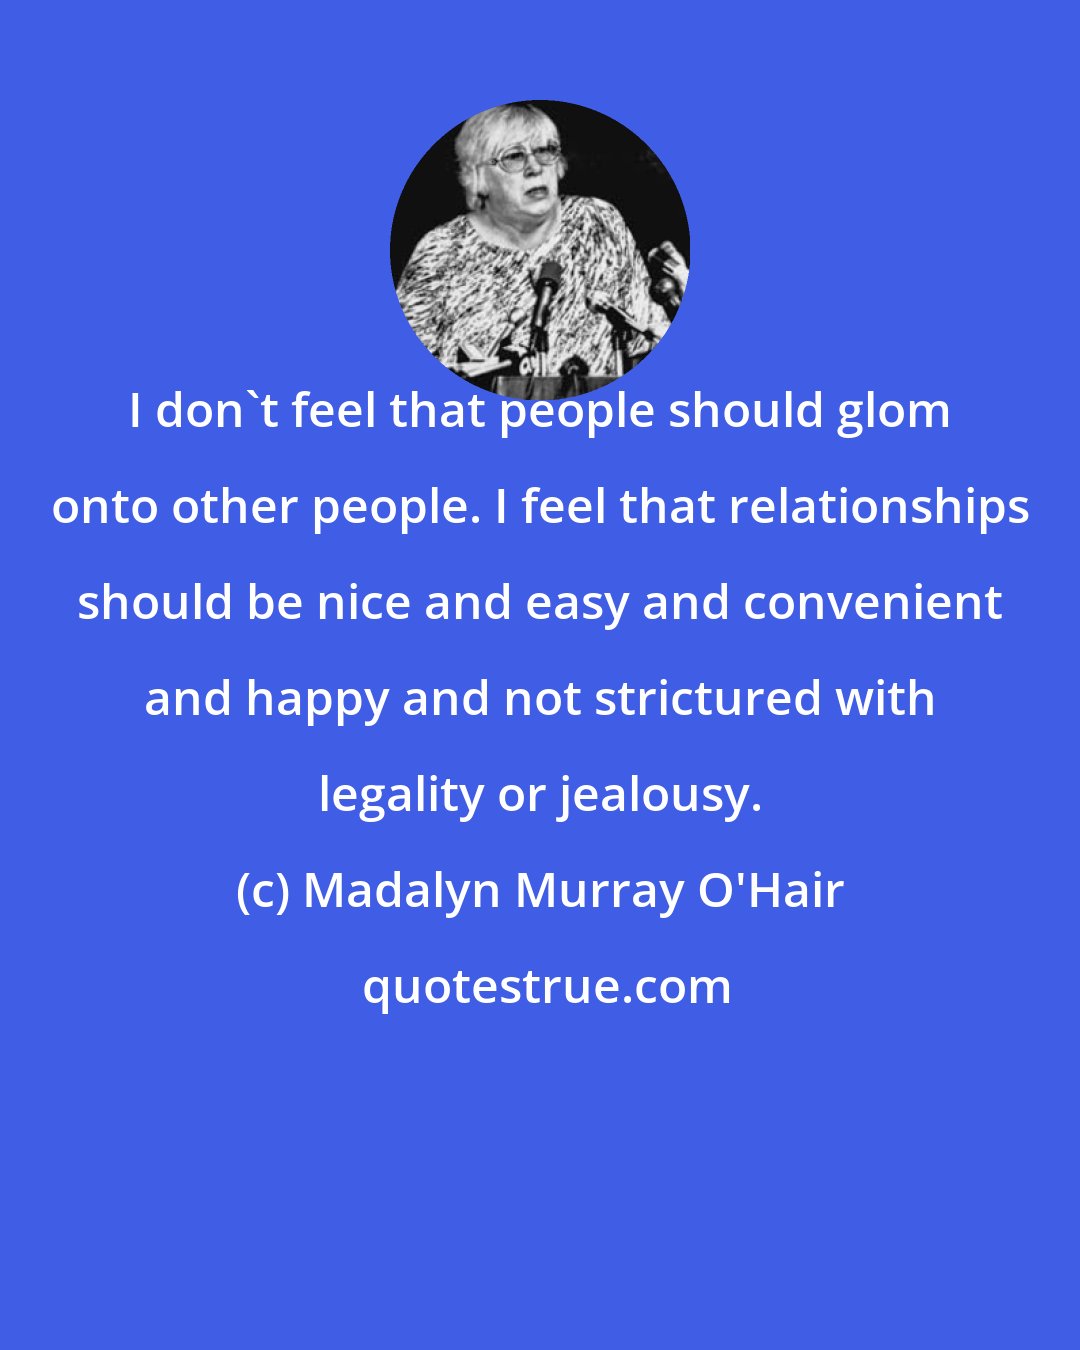 Madalyn Murray O'Hair: I don't feel that people should glom onto other people. I feel that relationships should be nice and easy and convenient and happy and not strictured with legality or jealousy.